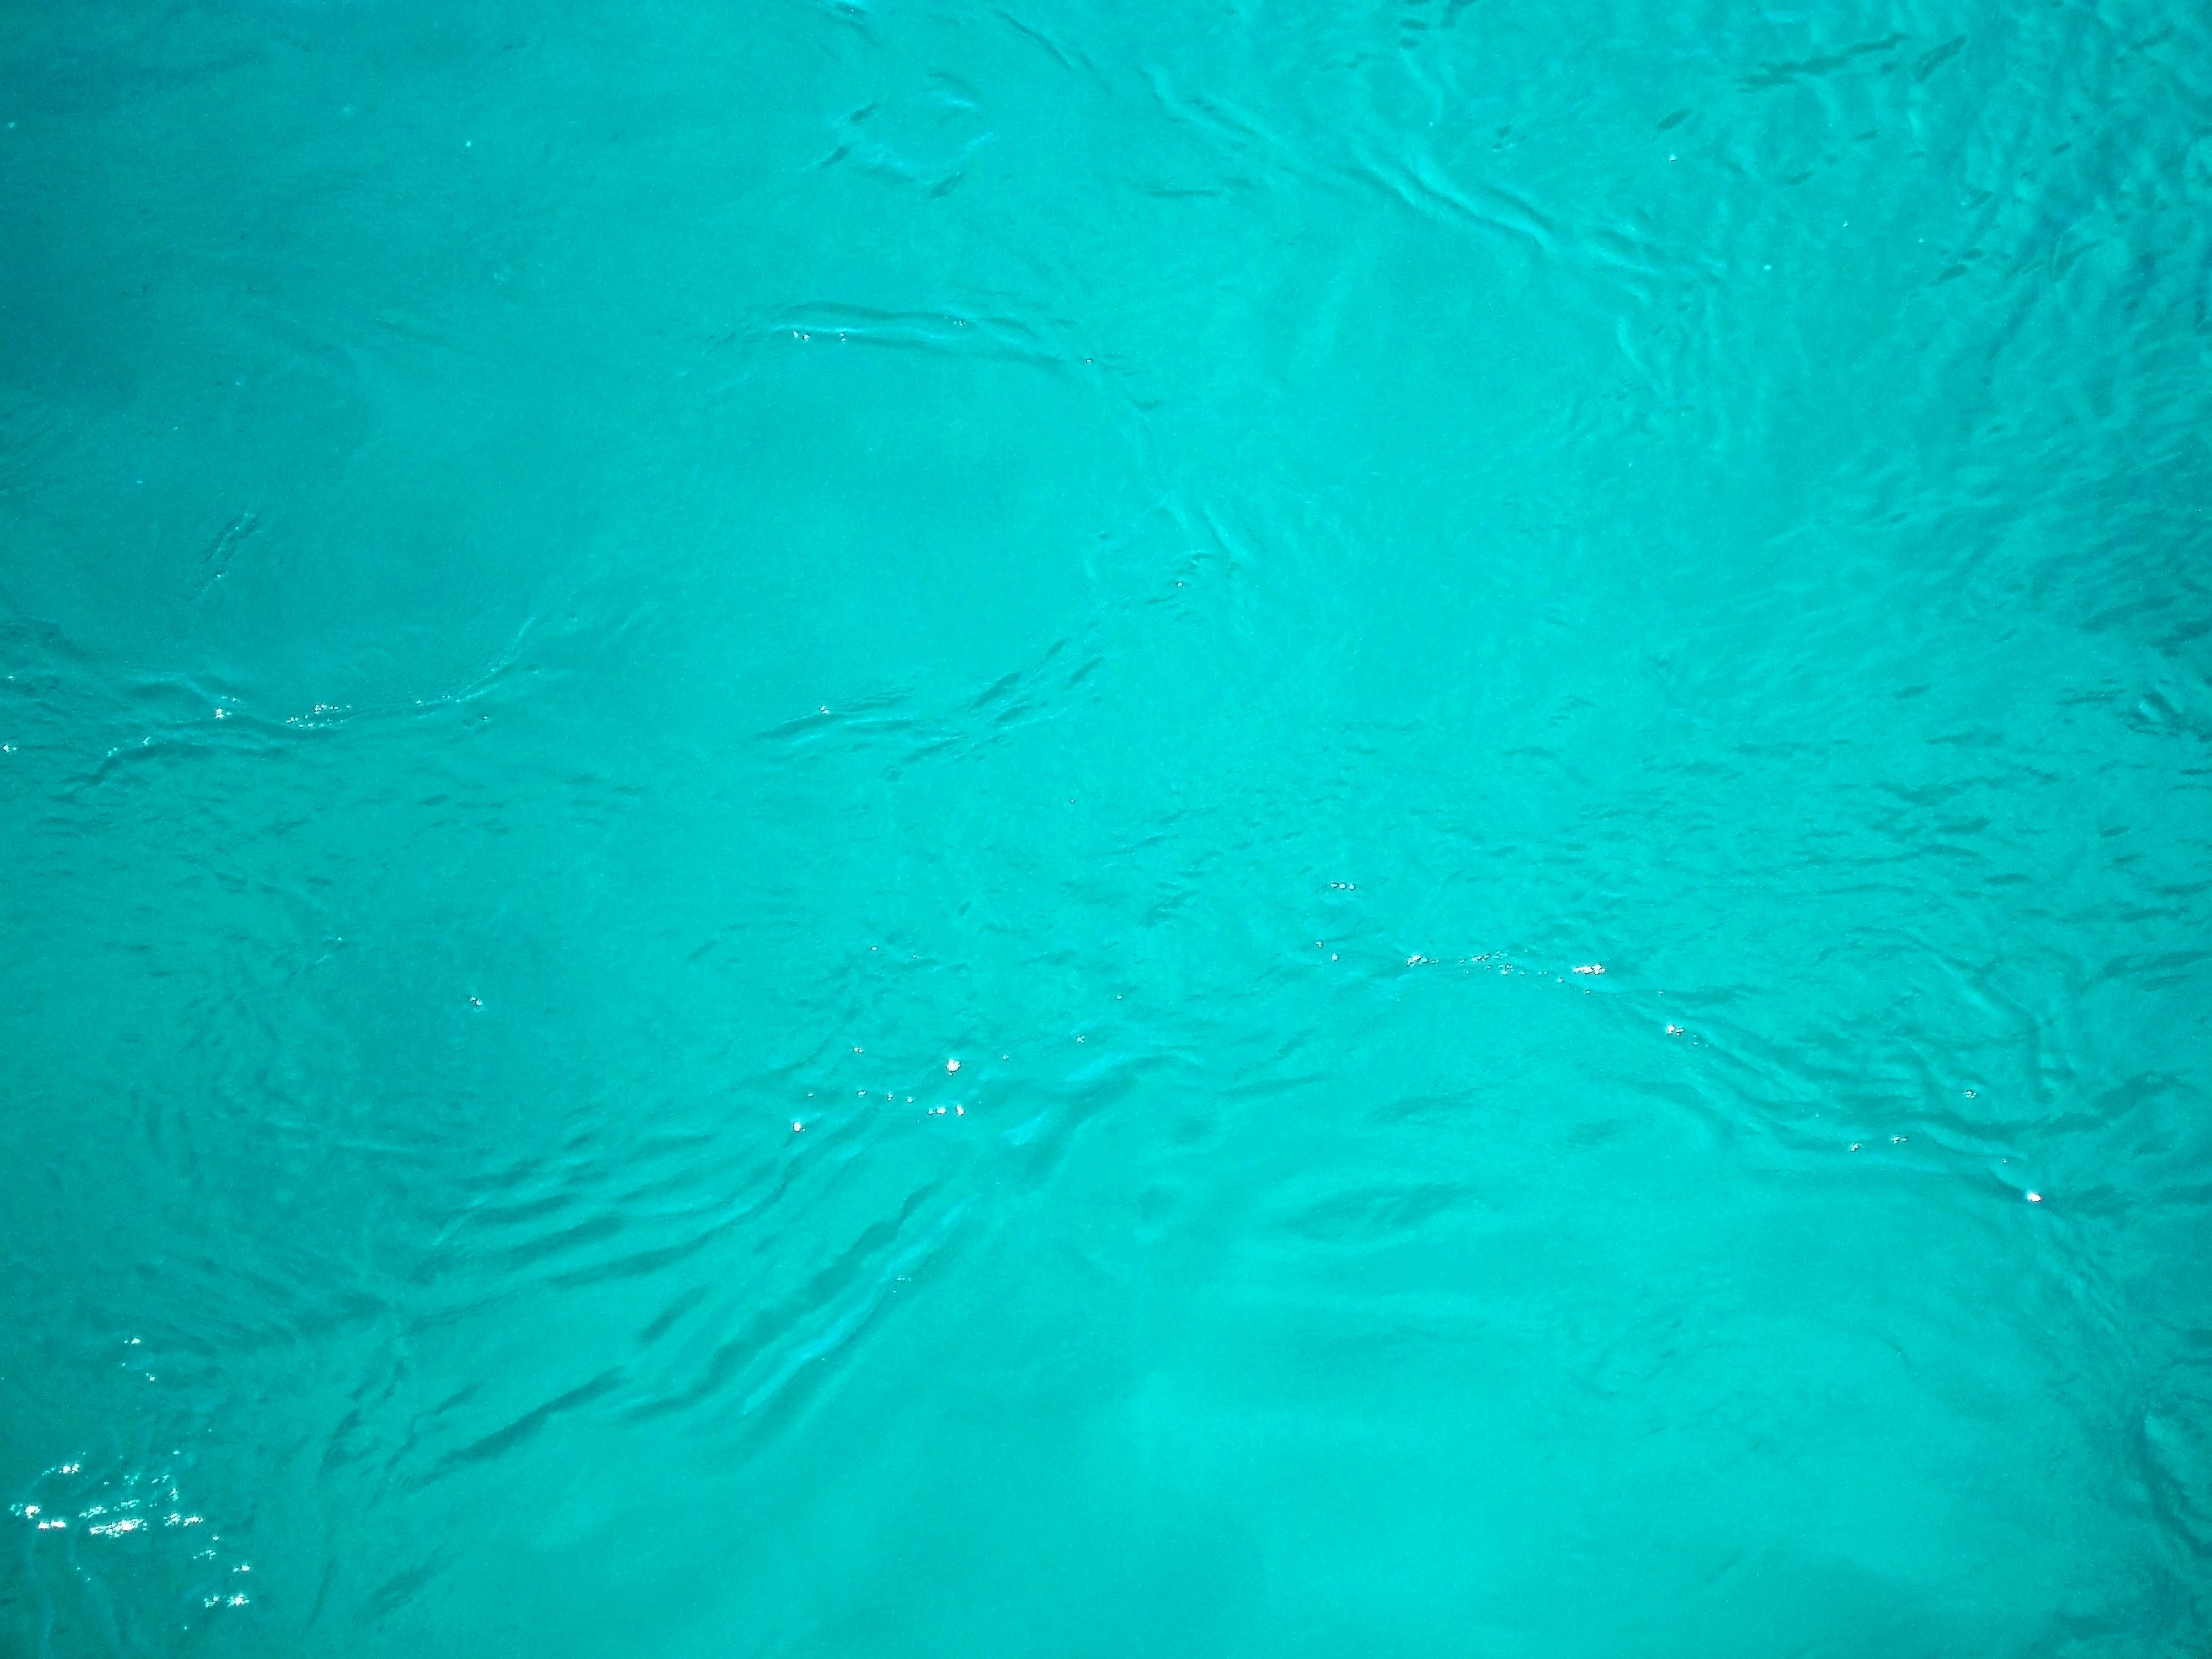 watery | Free backgrounds and textures | Cr103.com